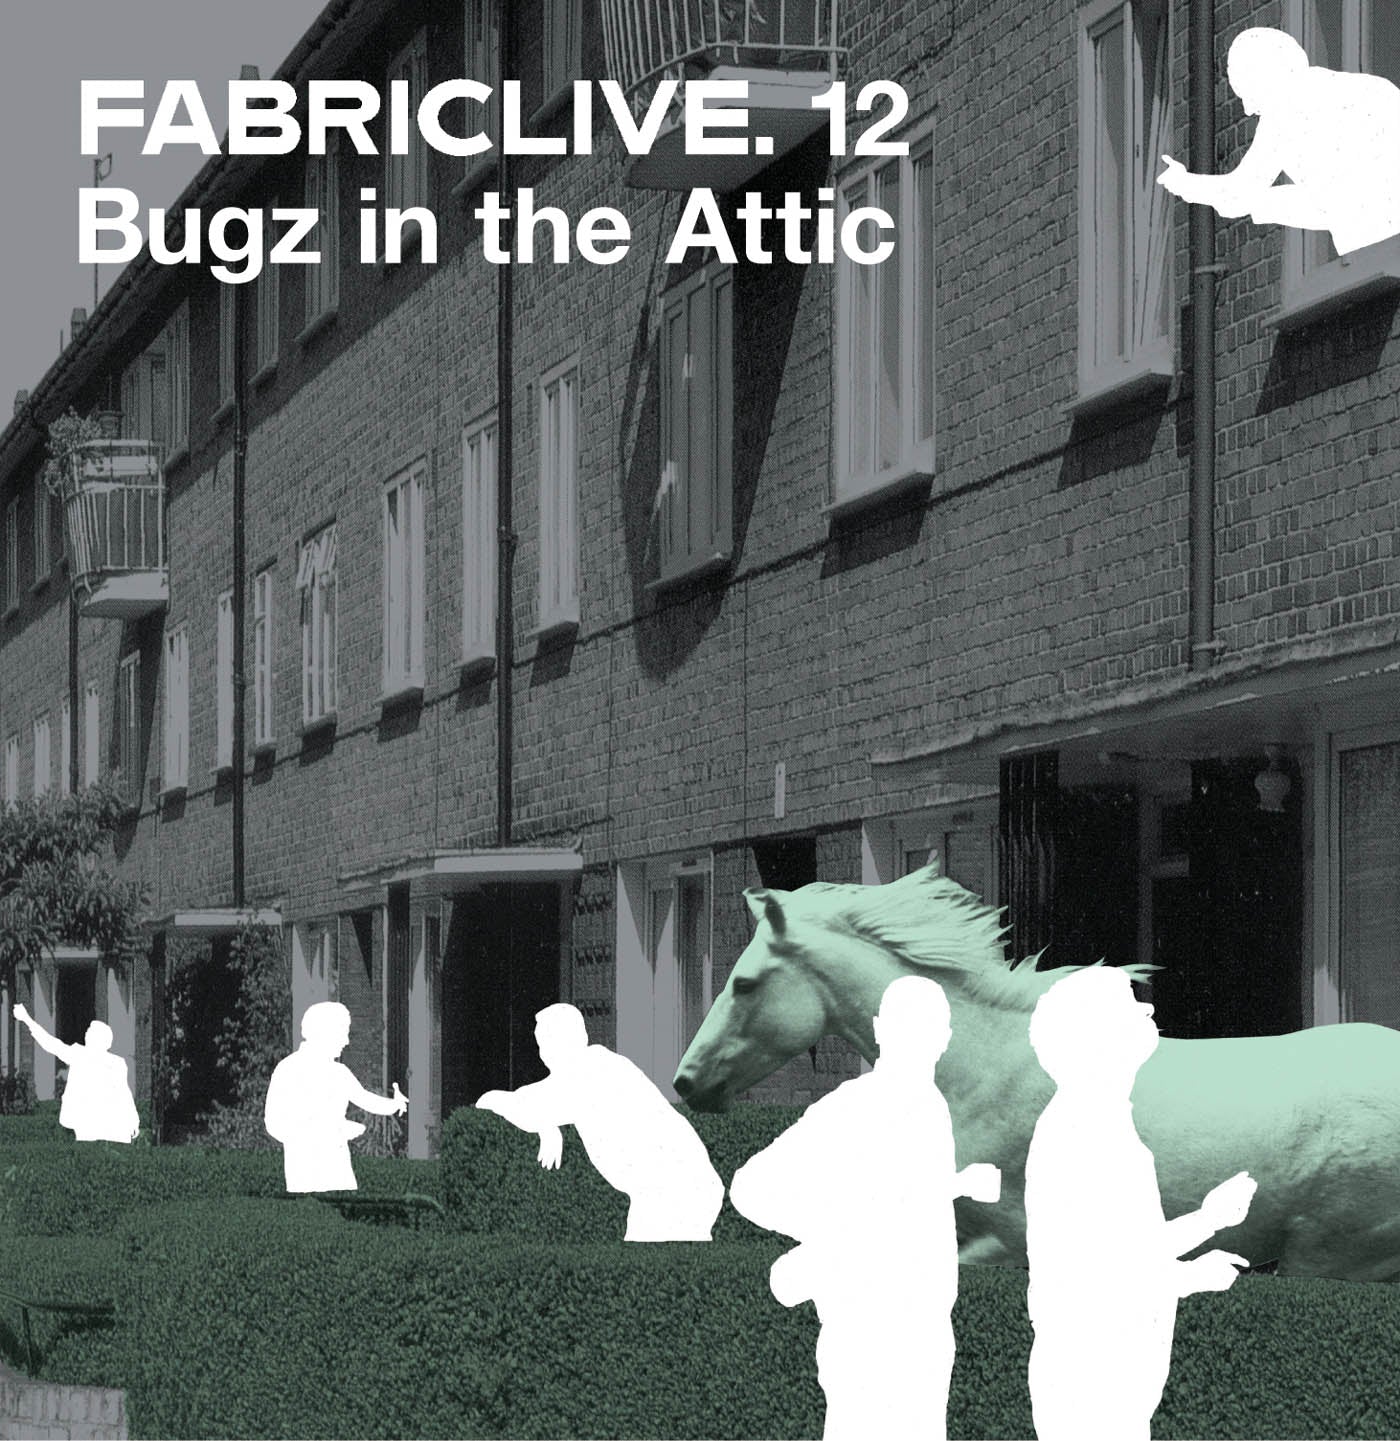 Bugz in the Attic - FABRICLIVE 12 CD